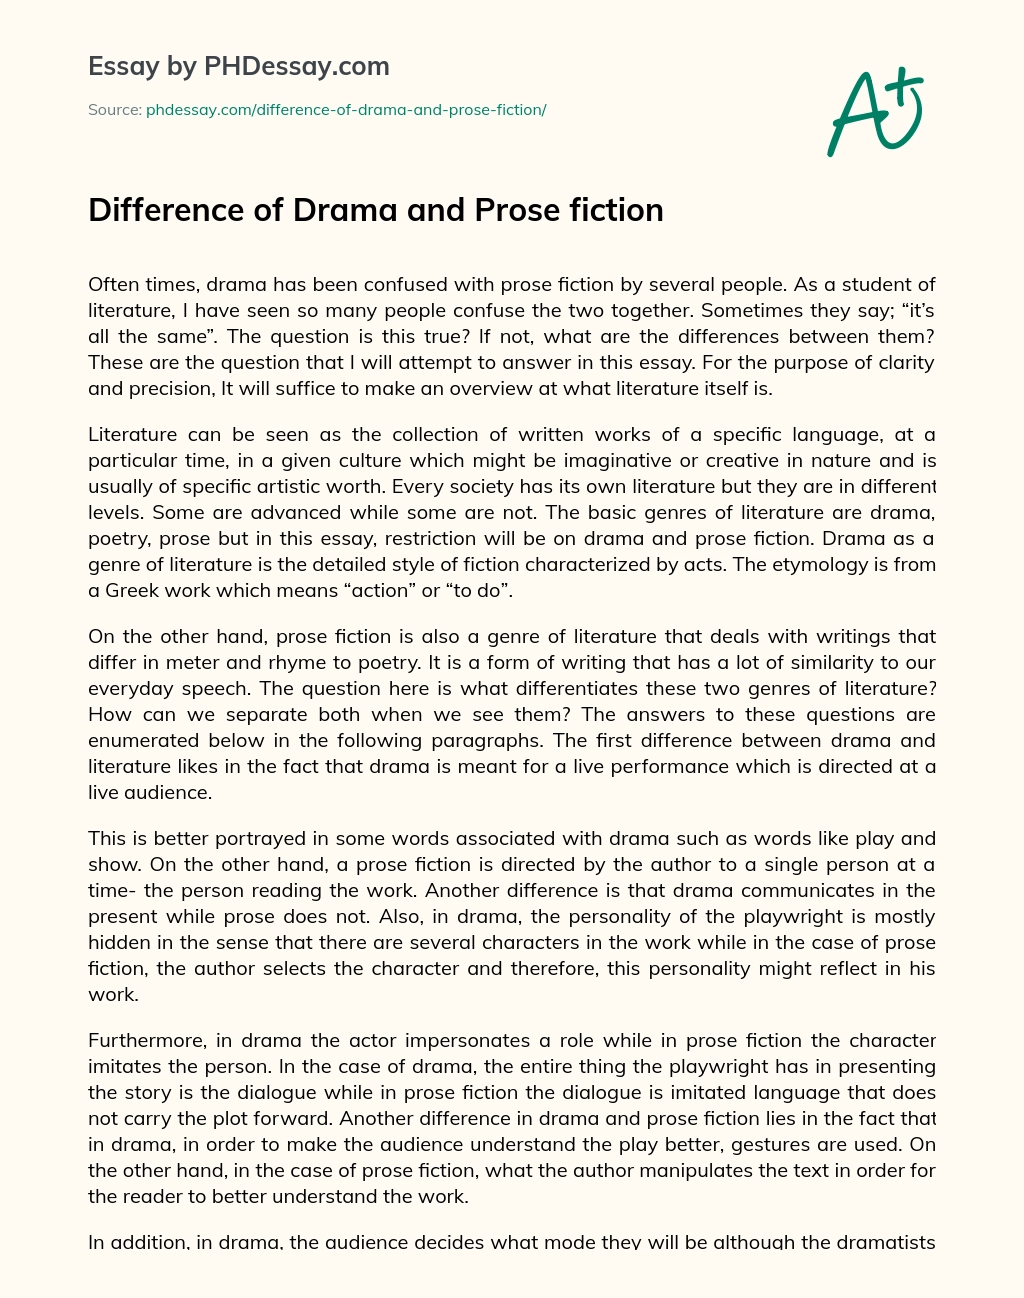 Difference of Drama and Prose fiction - PHDessay.com